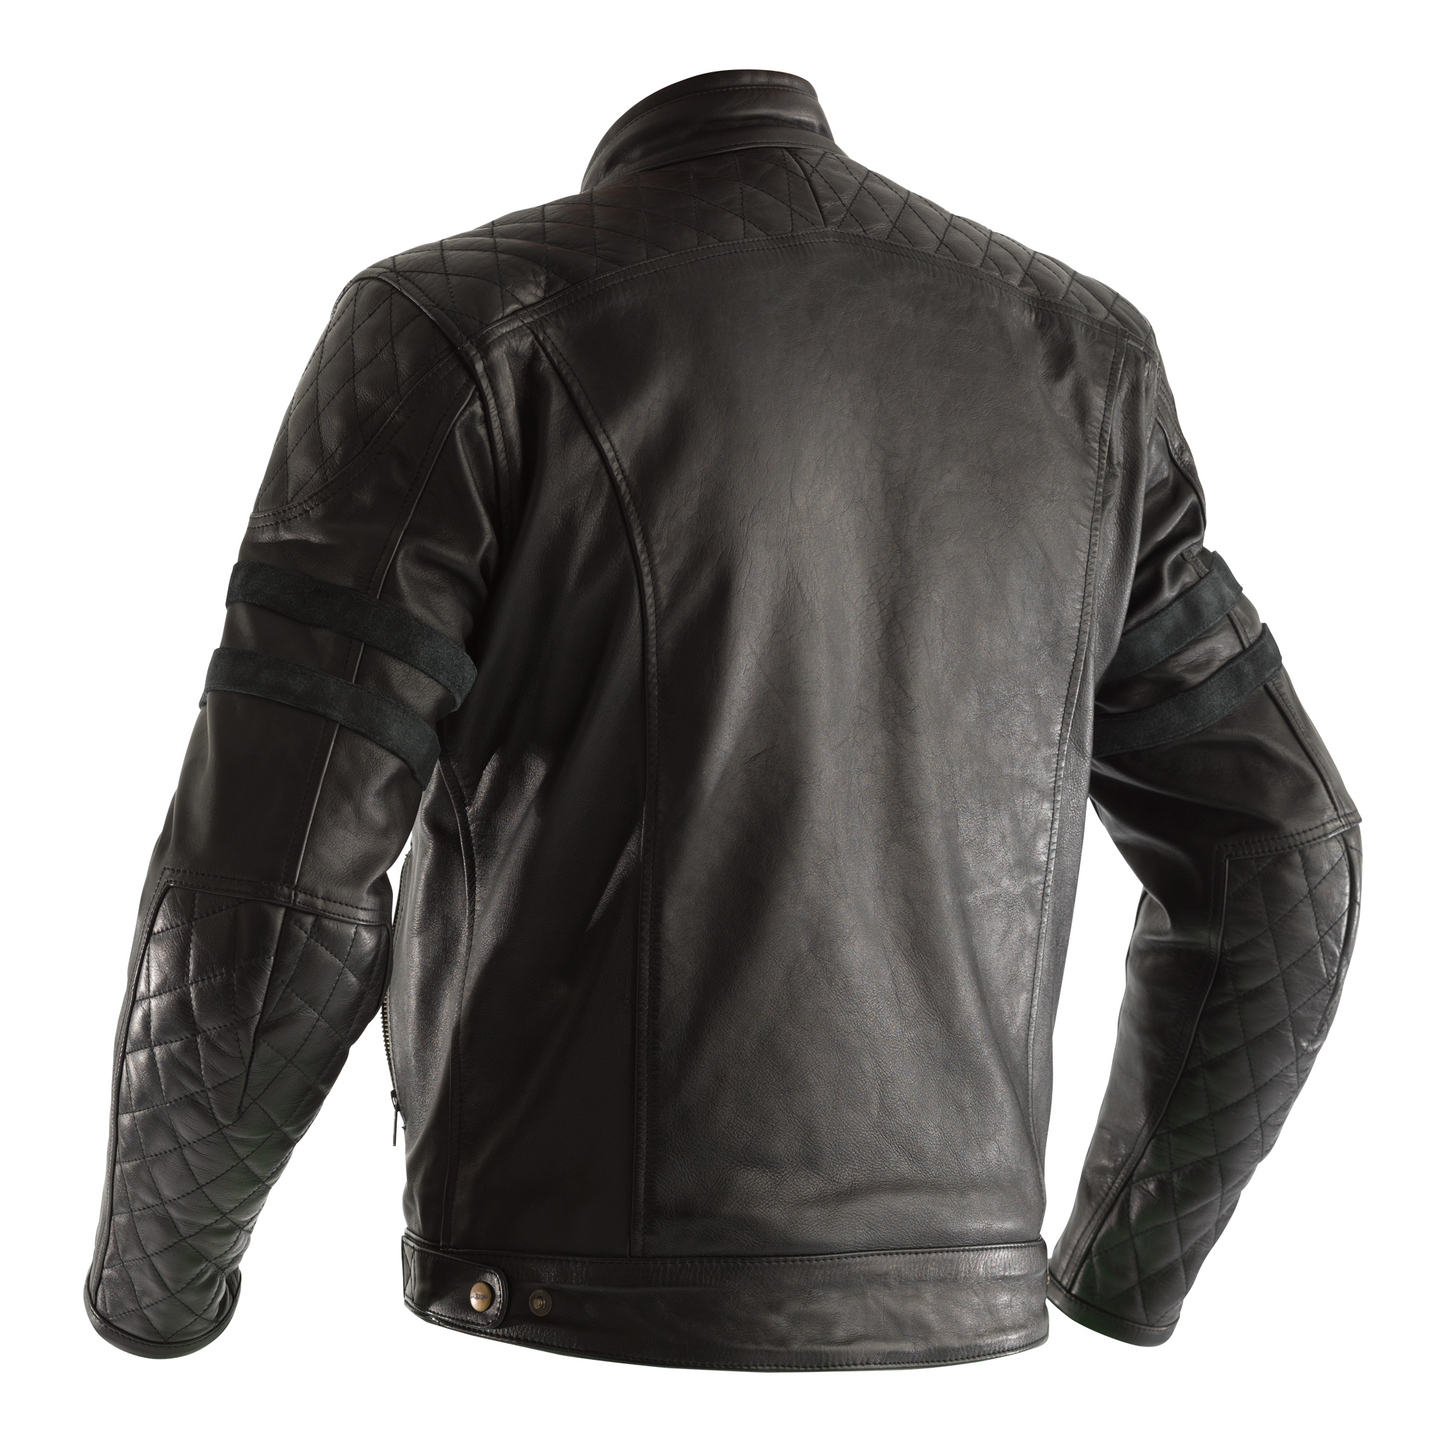 RST IOM TT Hillberry Leather Riding Jacket - CE APPROVED - Black